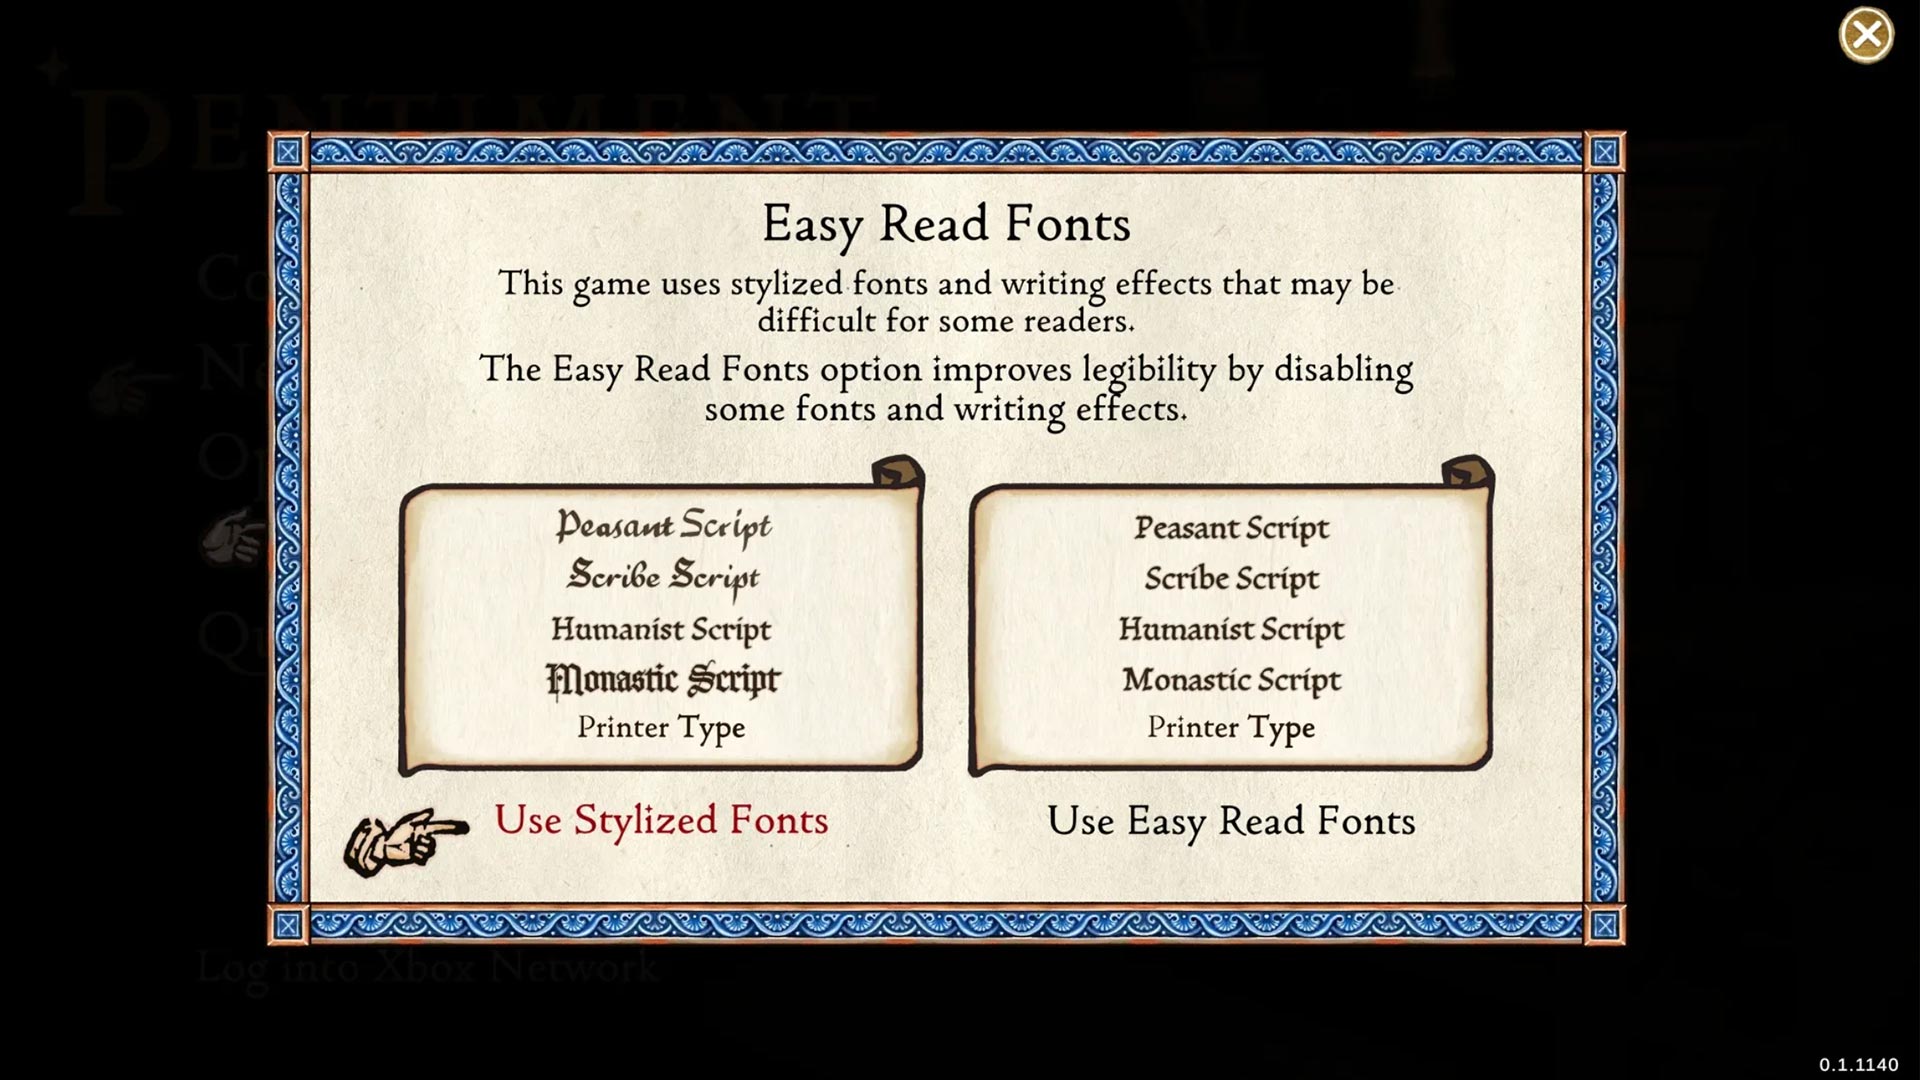 An image of one of the accessibility features in the game Pentiment, which allows you to choose the type of font.